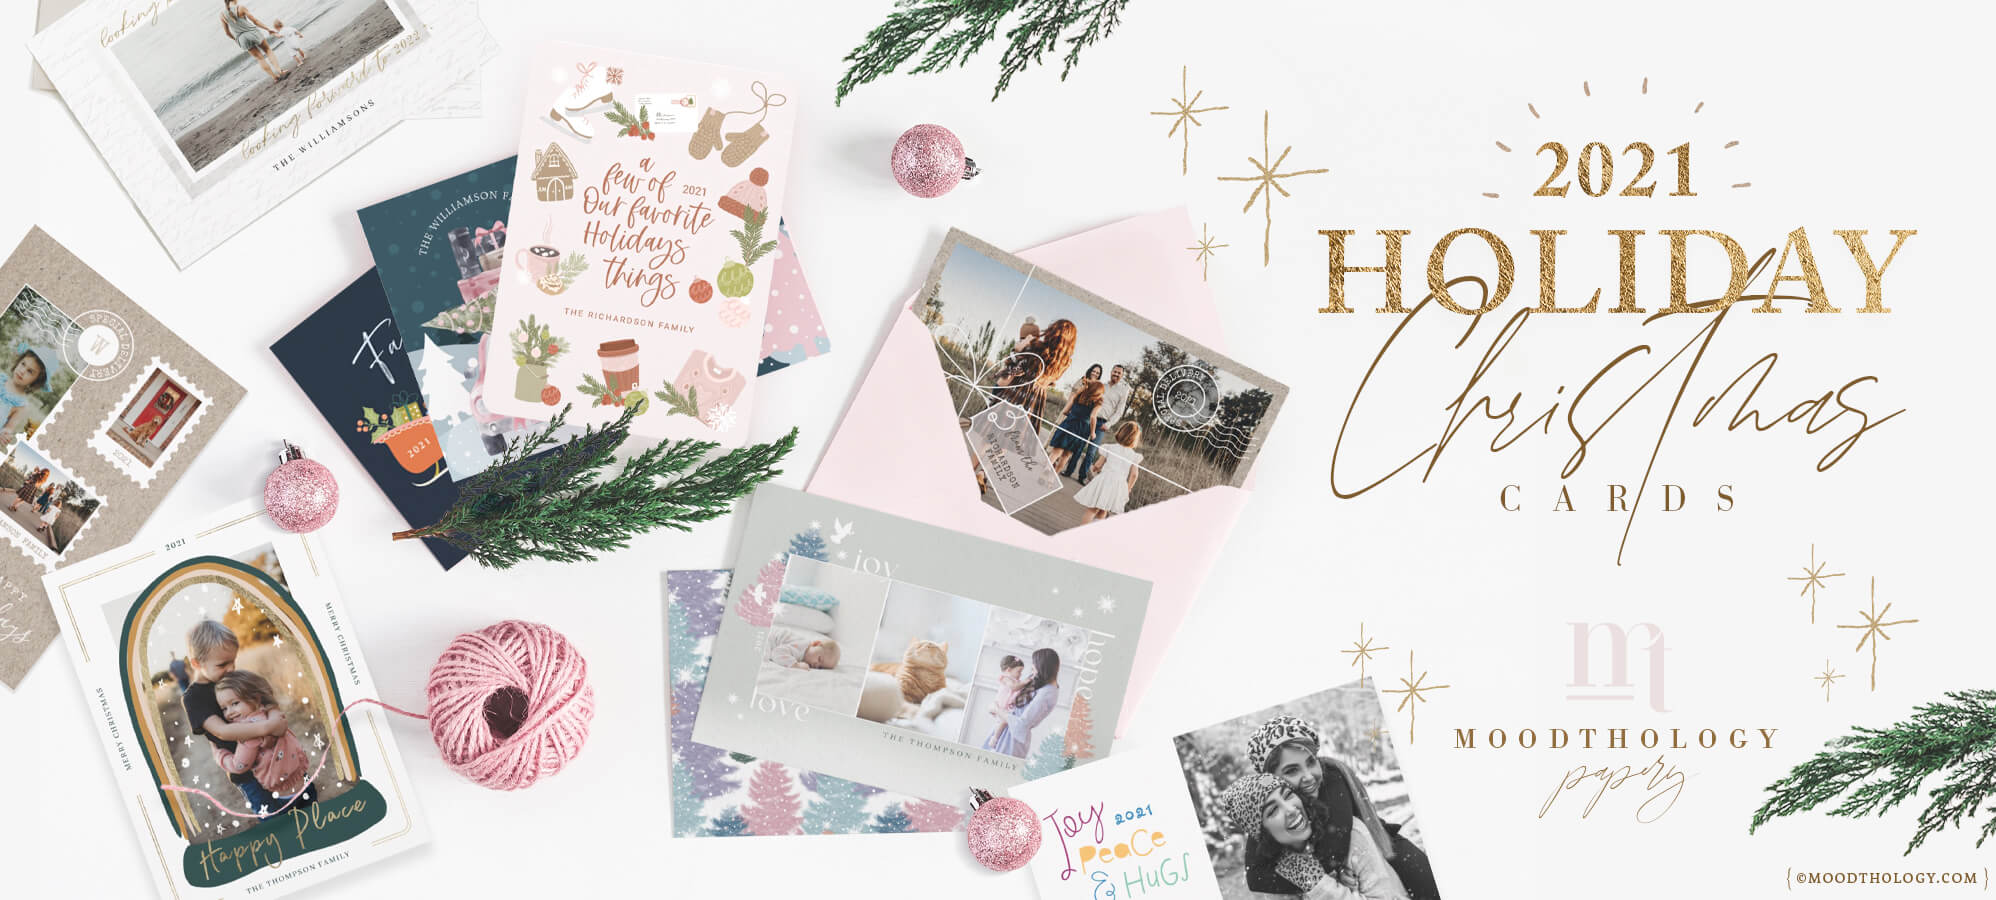 2021 Holiday Christmas Cards Trending This Season Moodthology Papery